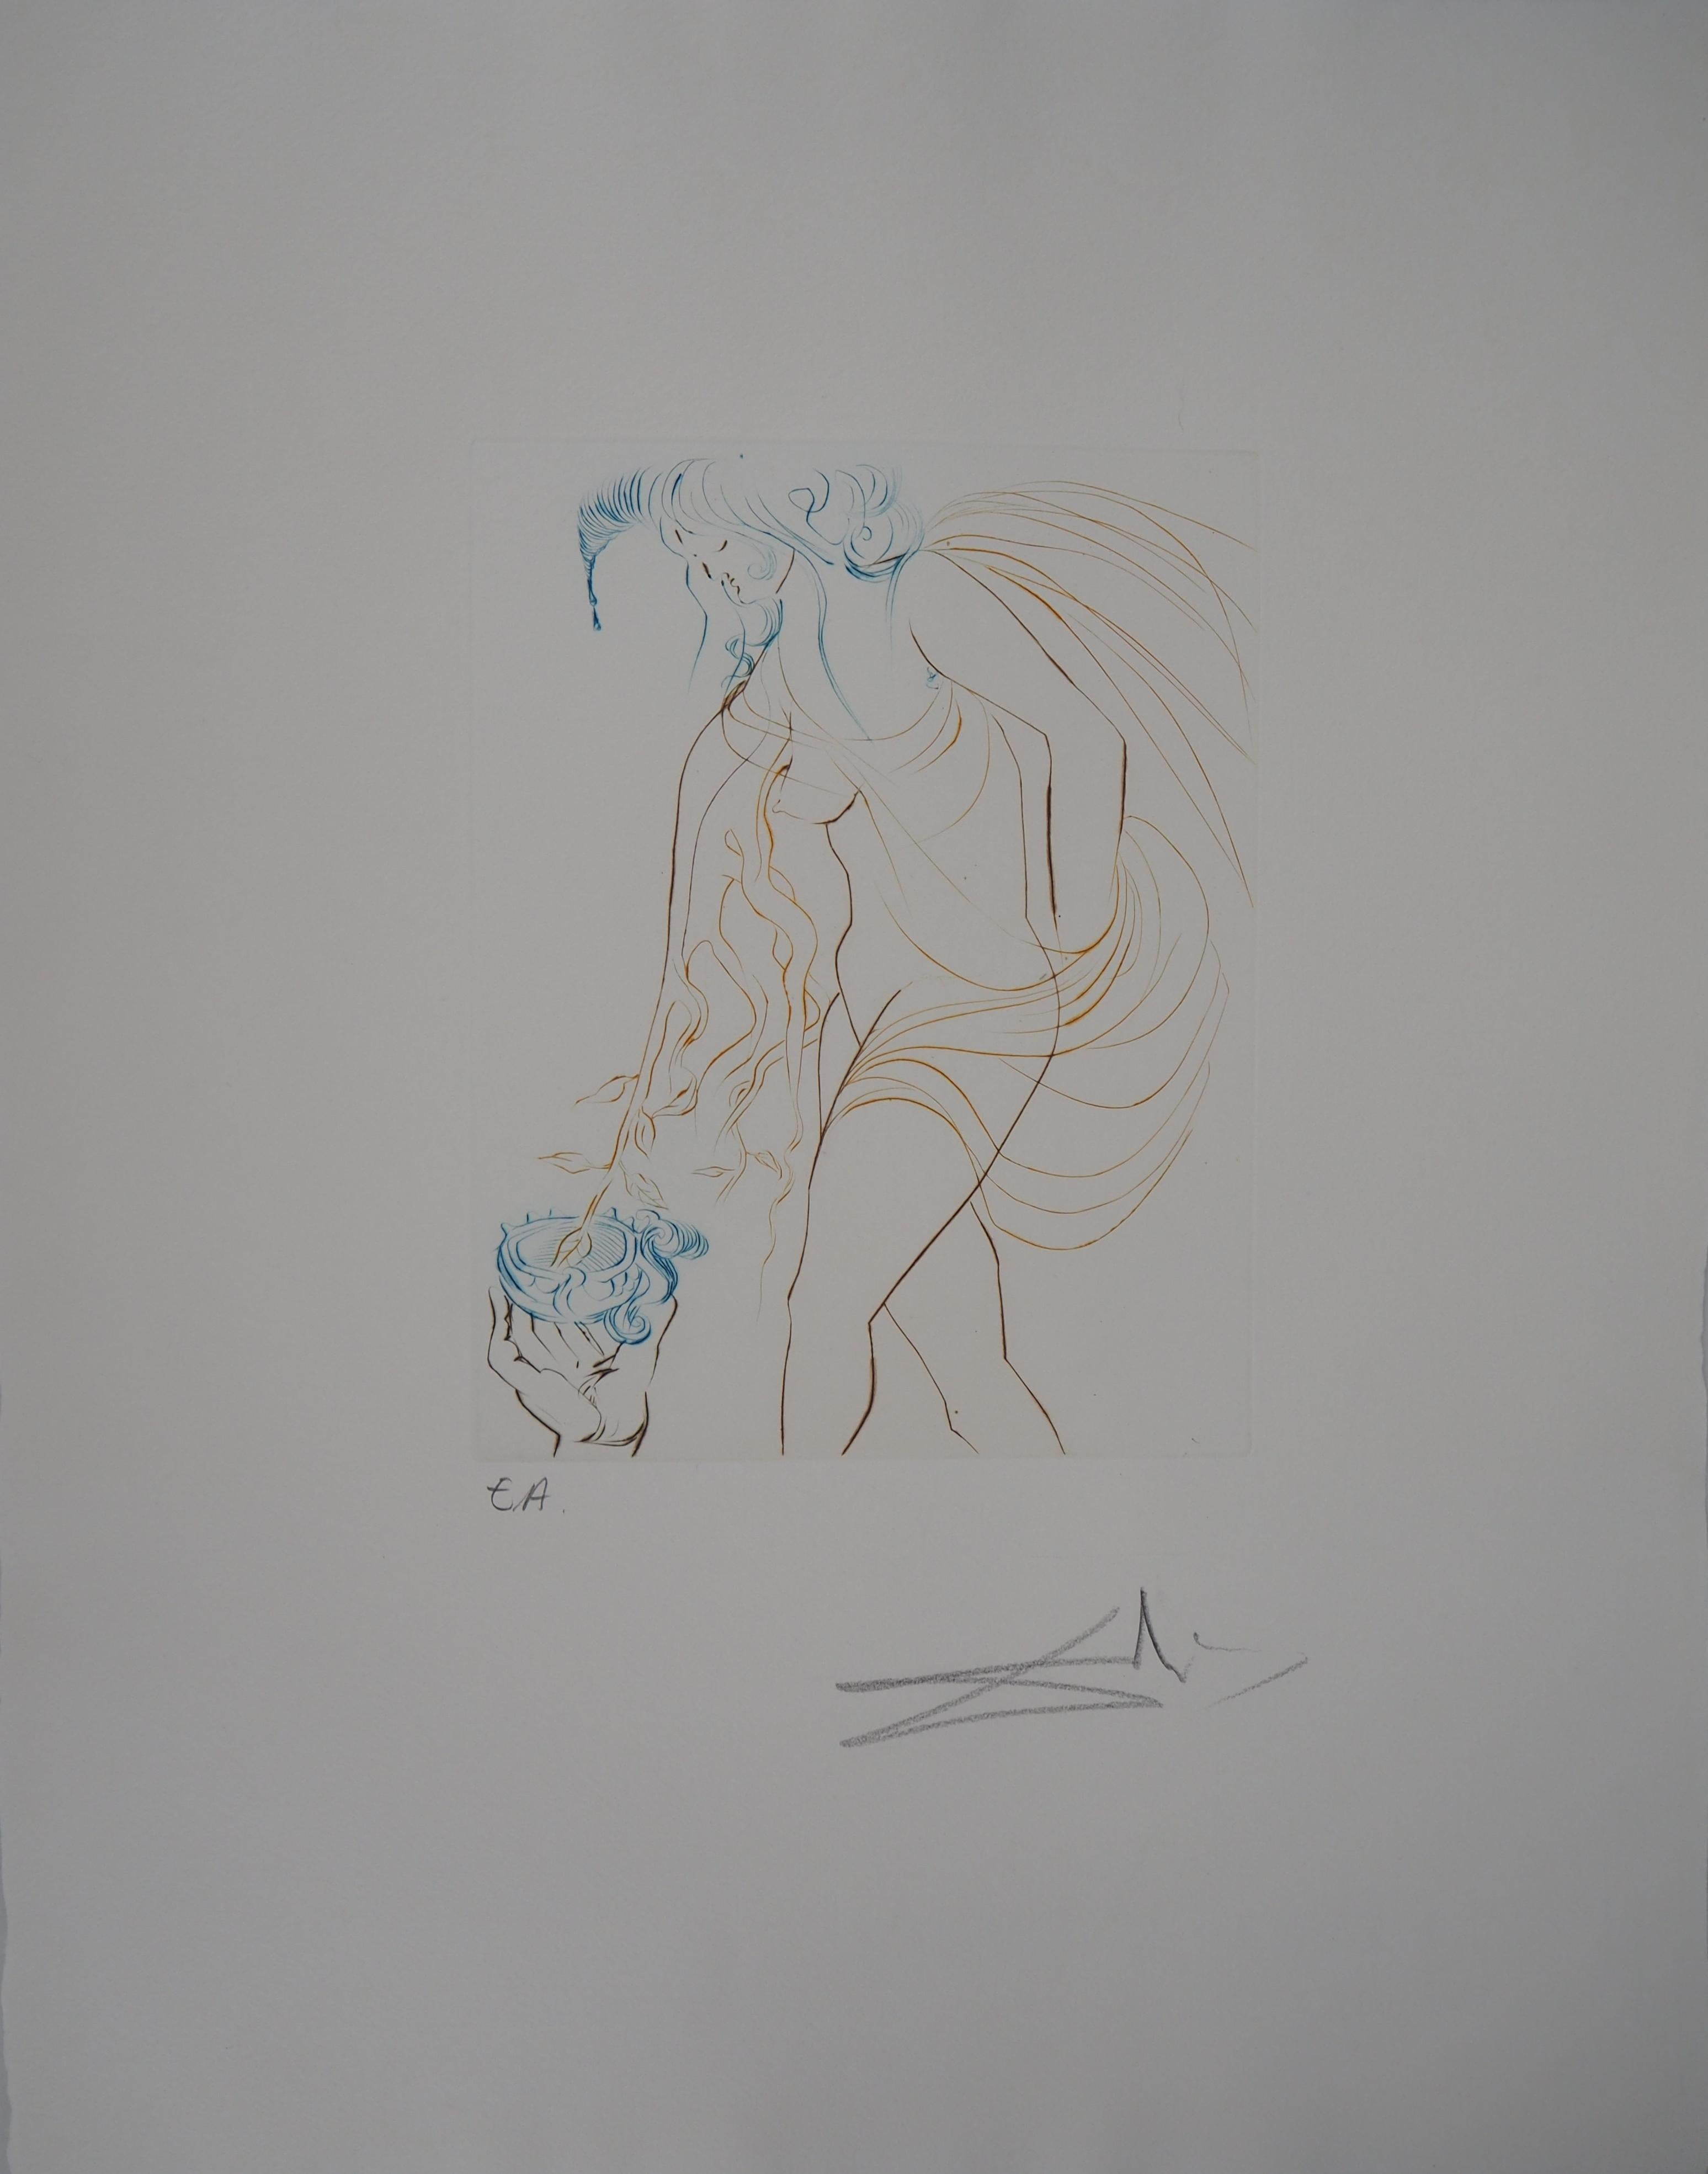 Salvador Dalí Figurative Print - Milton, Lost Paradise : The Cup Offered - Original Hand Signed Etching, 1974